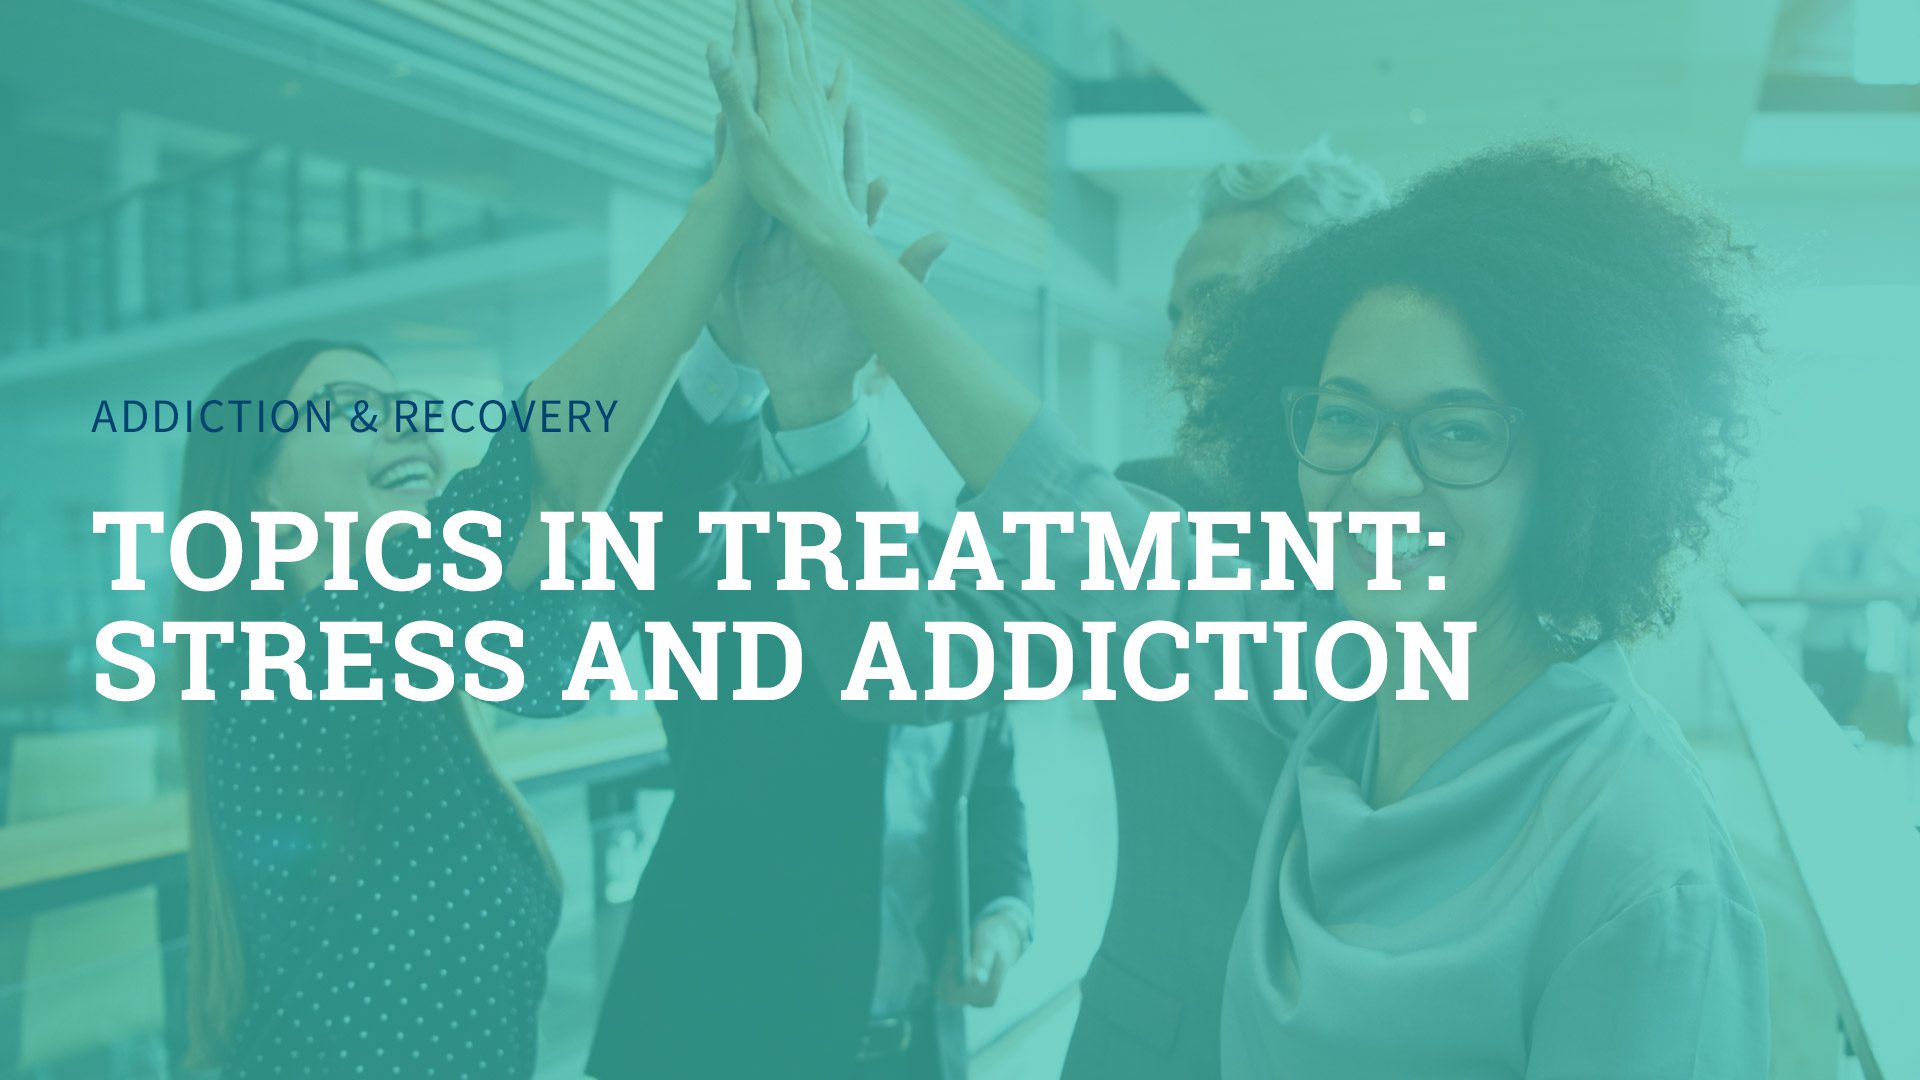 Topics in Treatment: Stress and Addiction